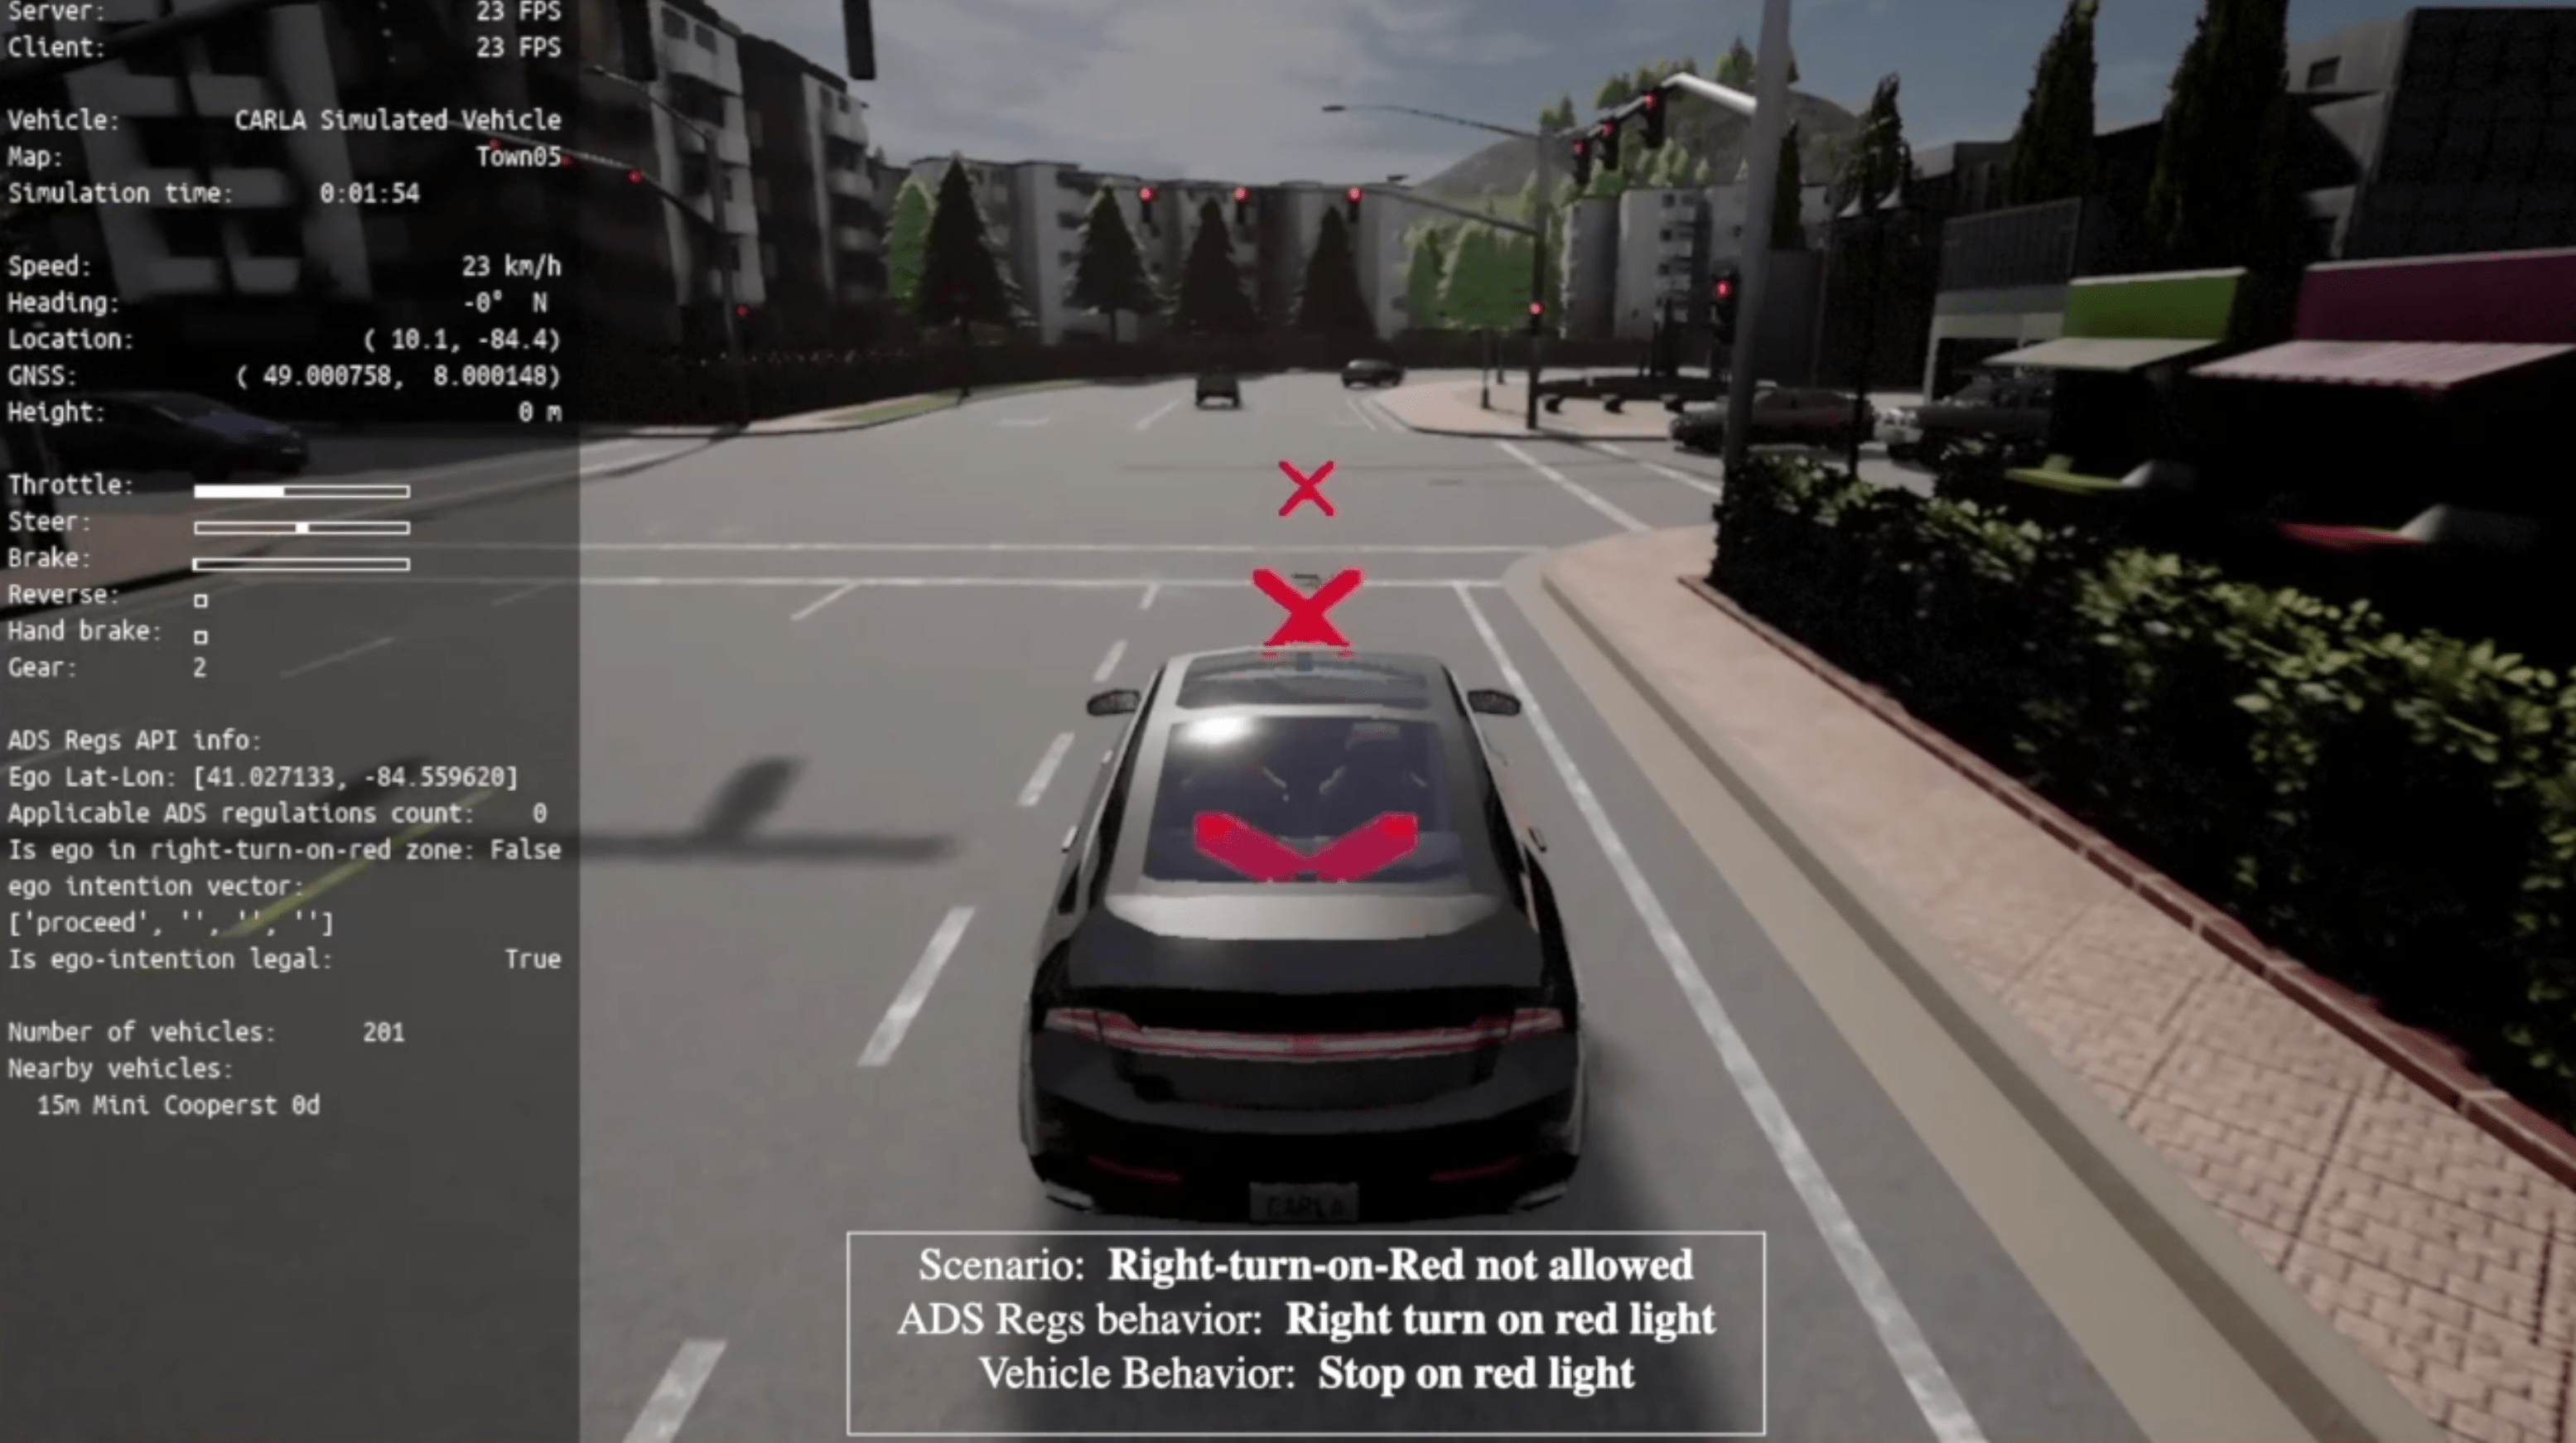 Simulated illustration of a vehicle approaching a red light. A panel at left illustrates information about the simulation.